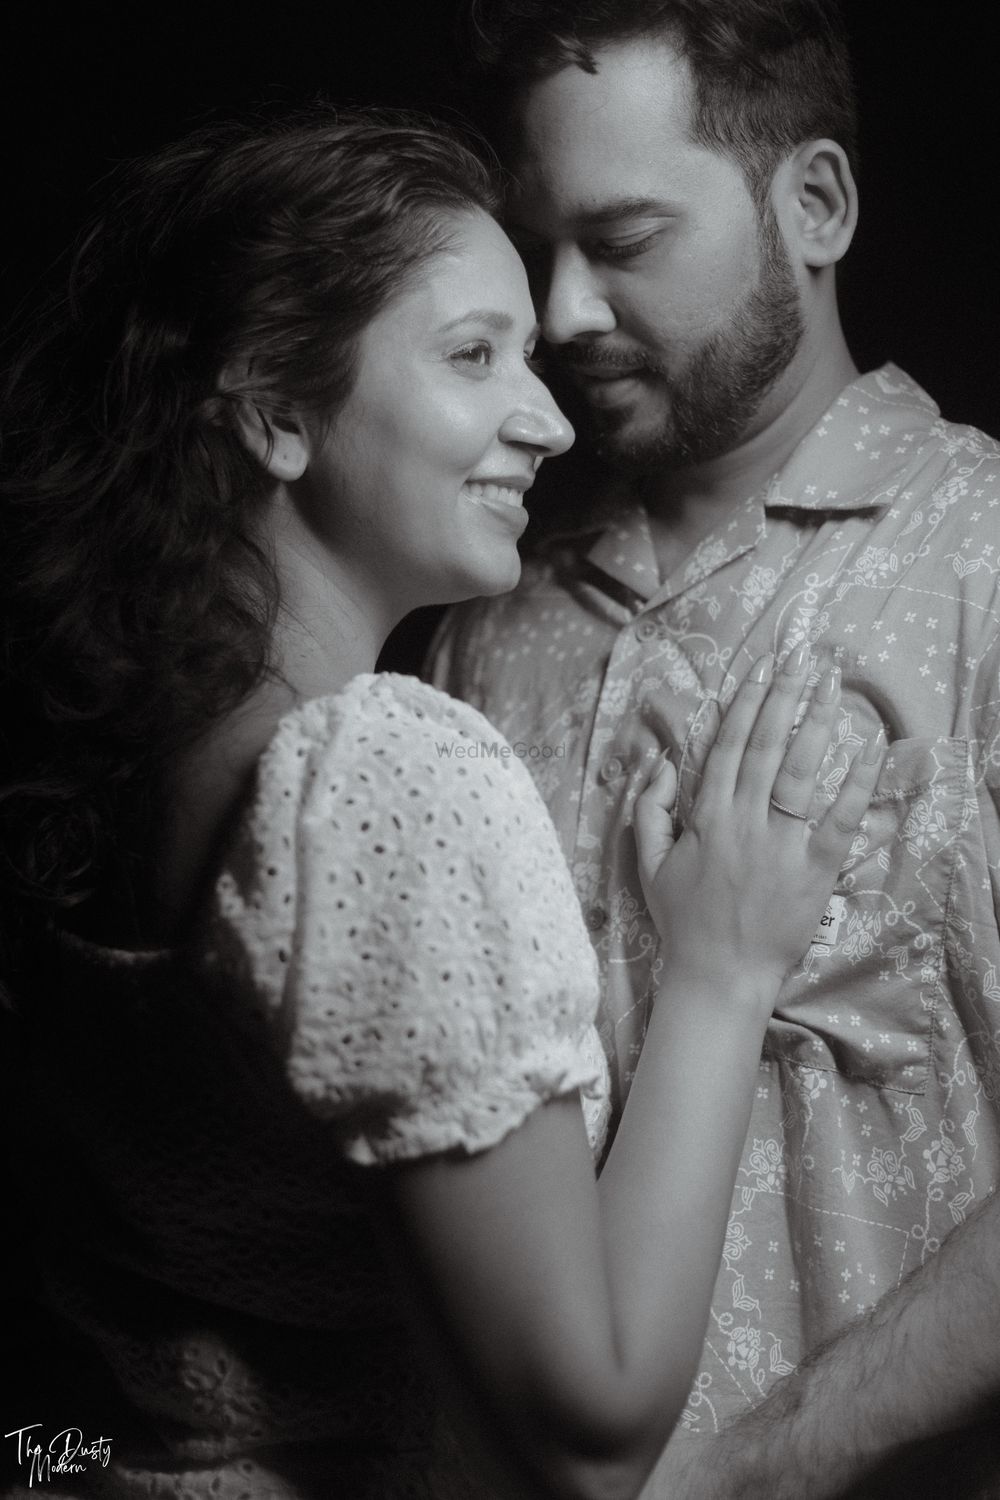 Photo By The Dusty Modern Pictures - Pre Wedding Photographers